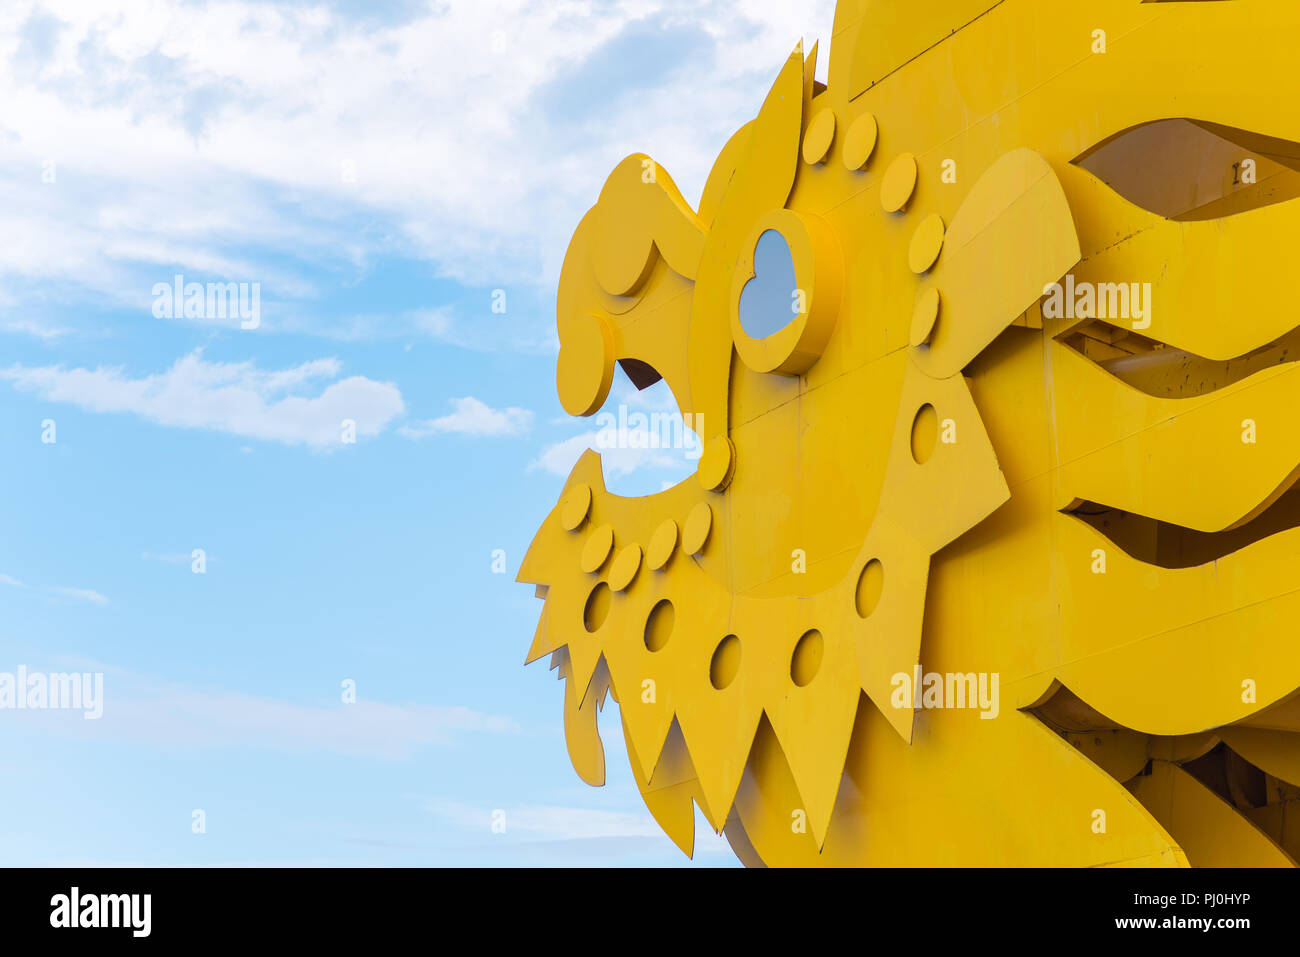 Da Nang, Vietnam - May 7, 2018: a dragon's head against the blue sky, a detail of the Dragon Bridge located in the central part of the city. Stock Photo